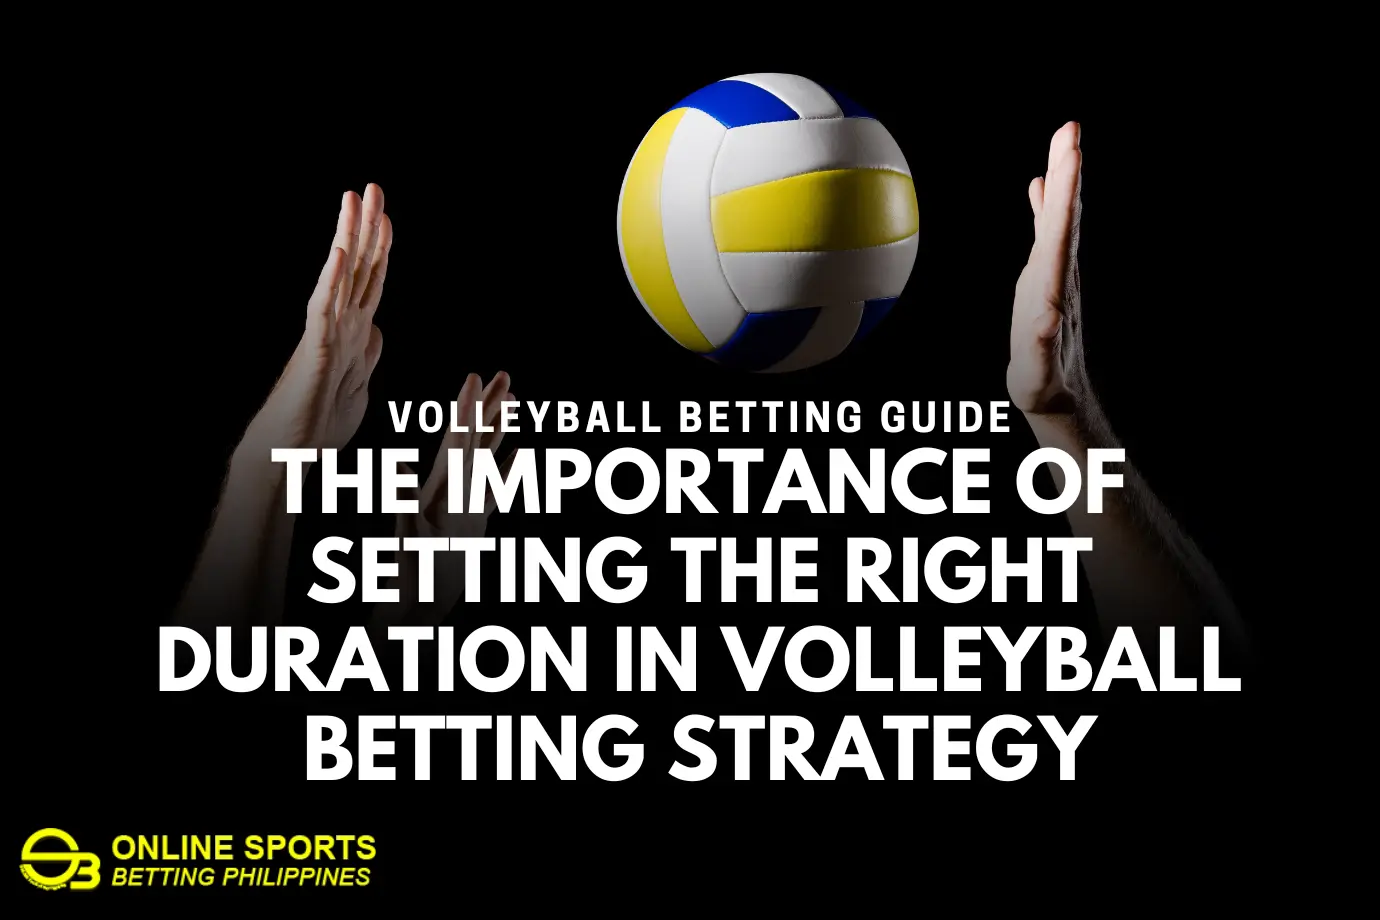 The Importance of Setting the Right Duration in Volleyball Betting Strategy